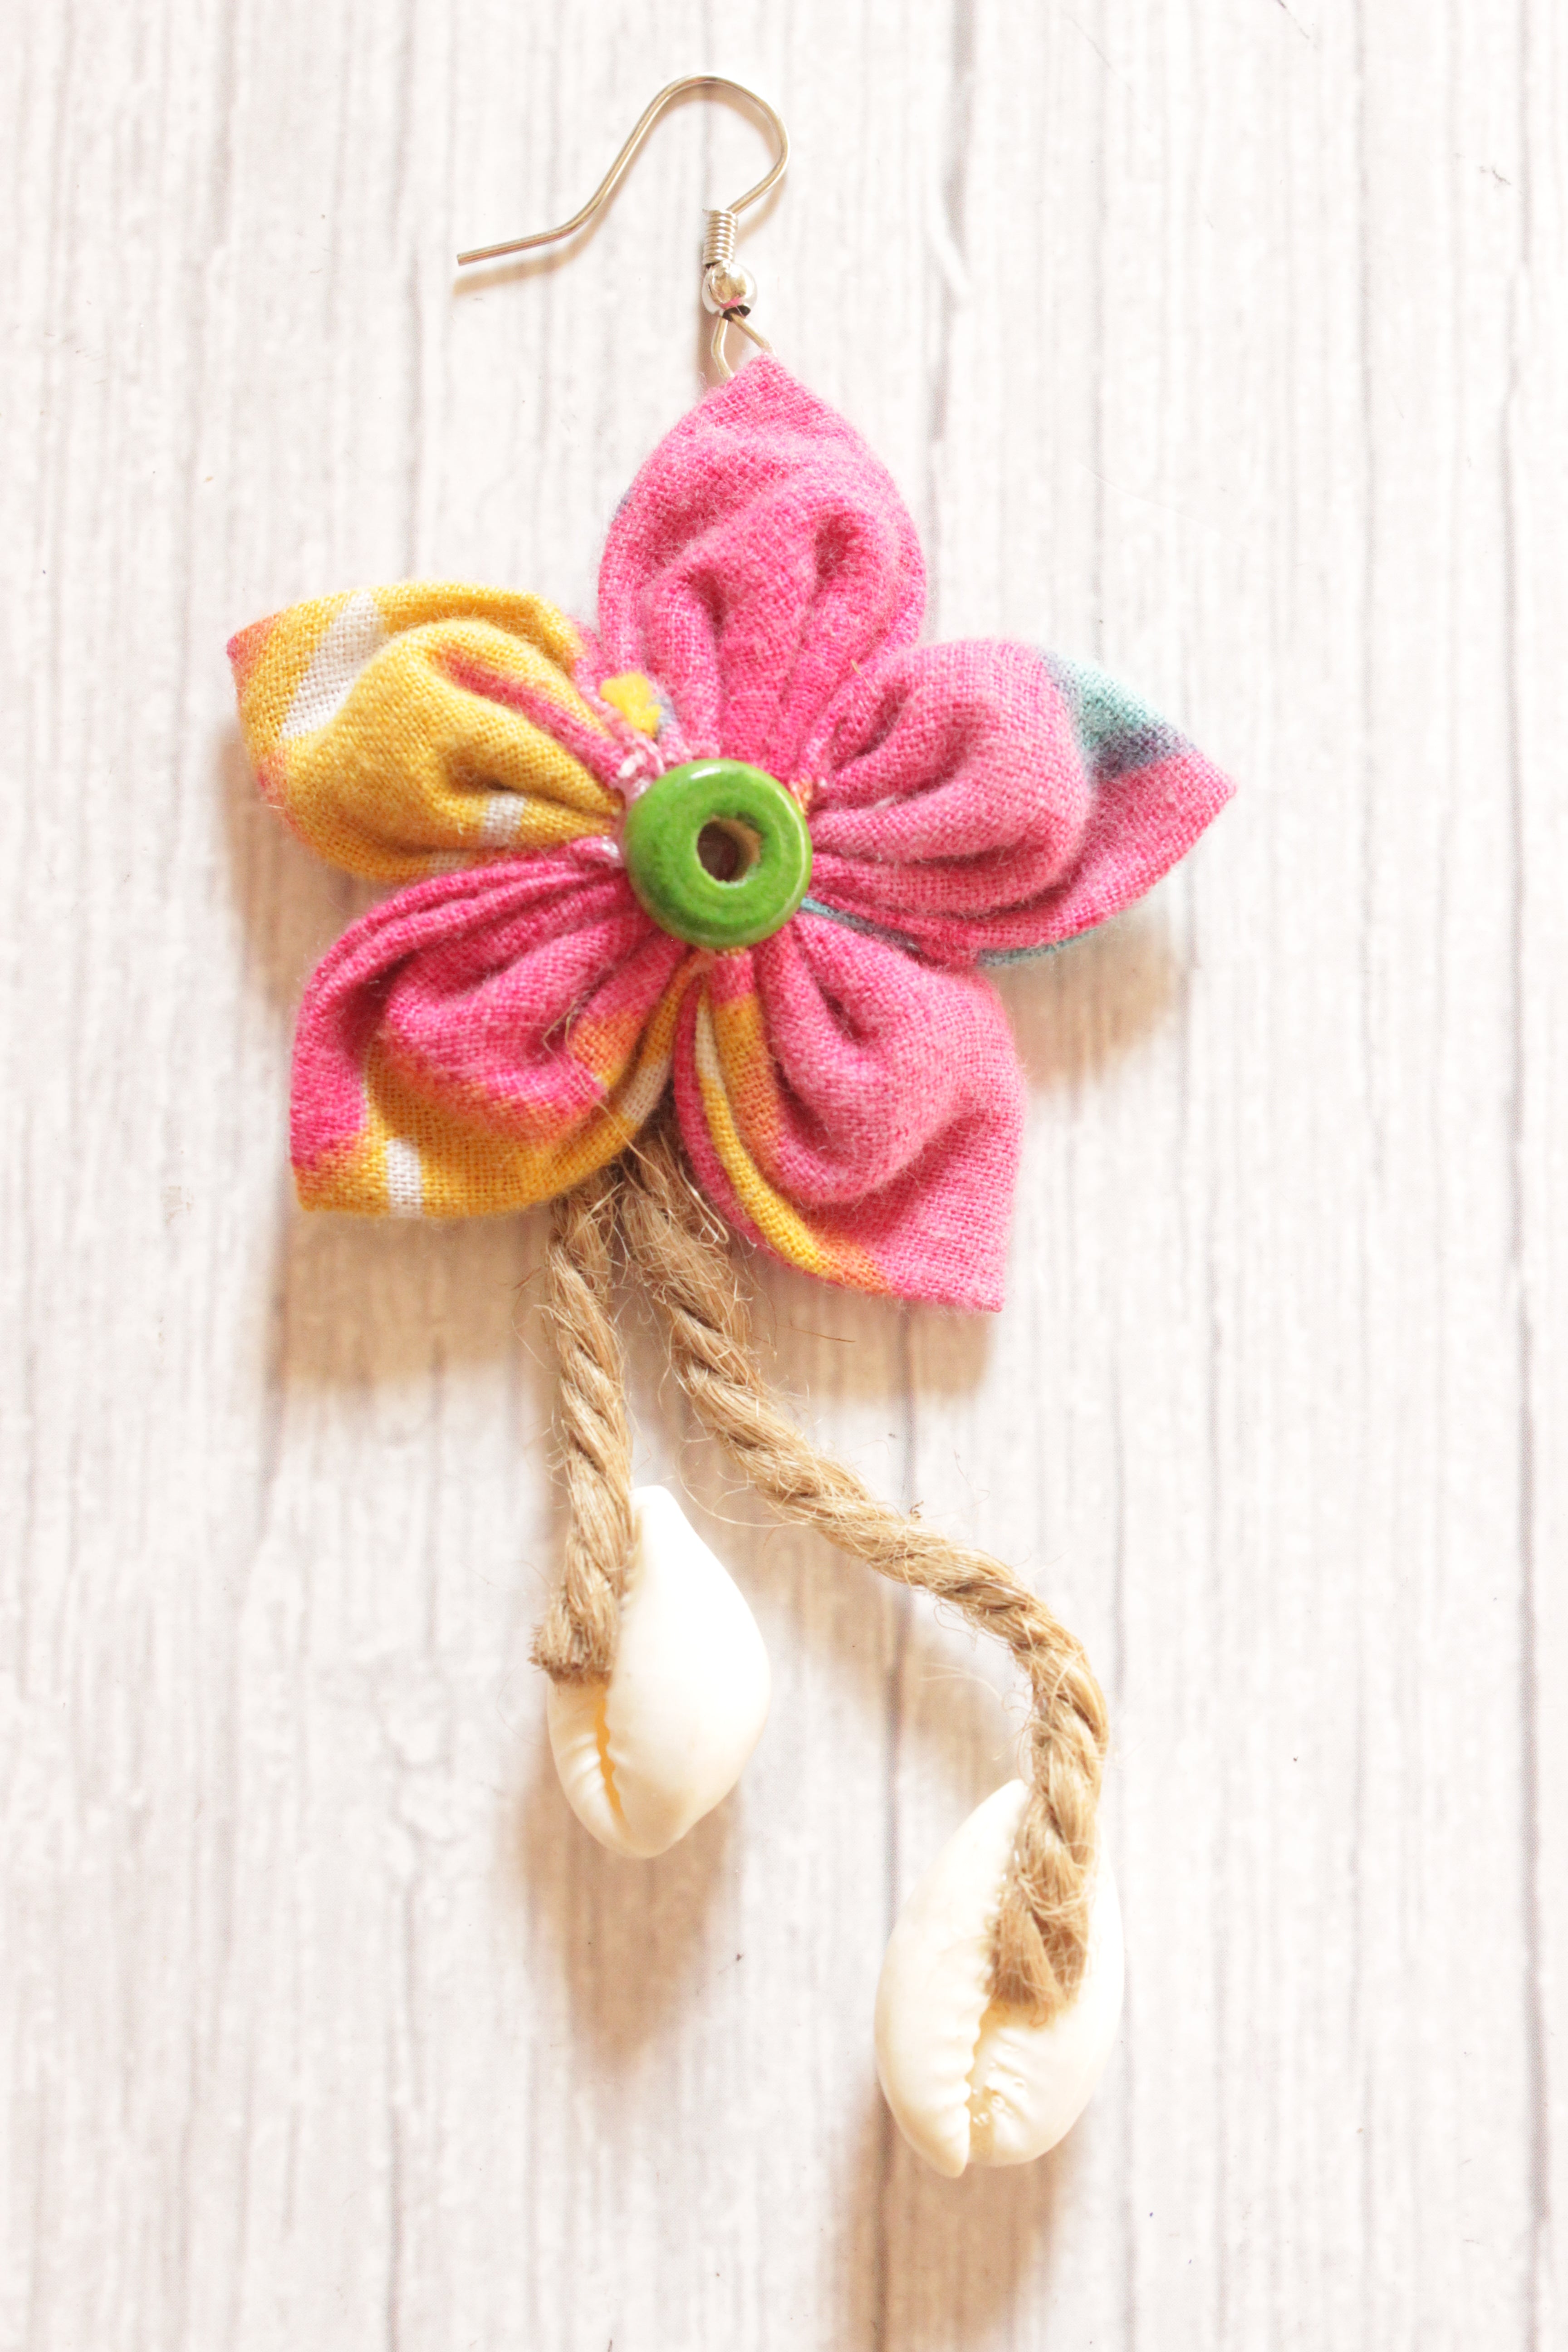 Pink Fabric Handmade Flower Earrings Accentuated with Shells Attached to Jute Strings